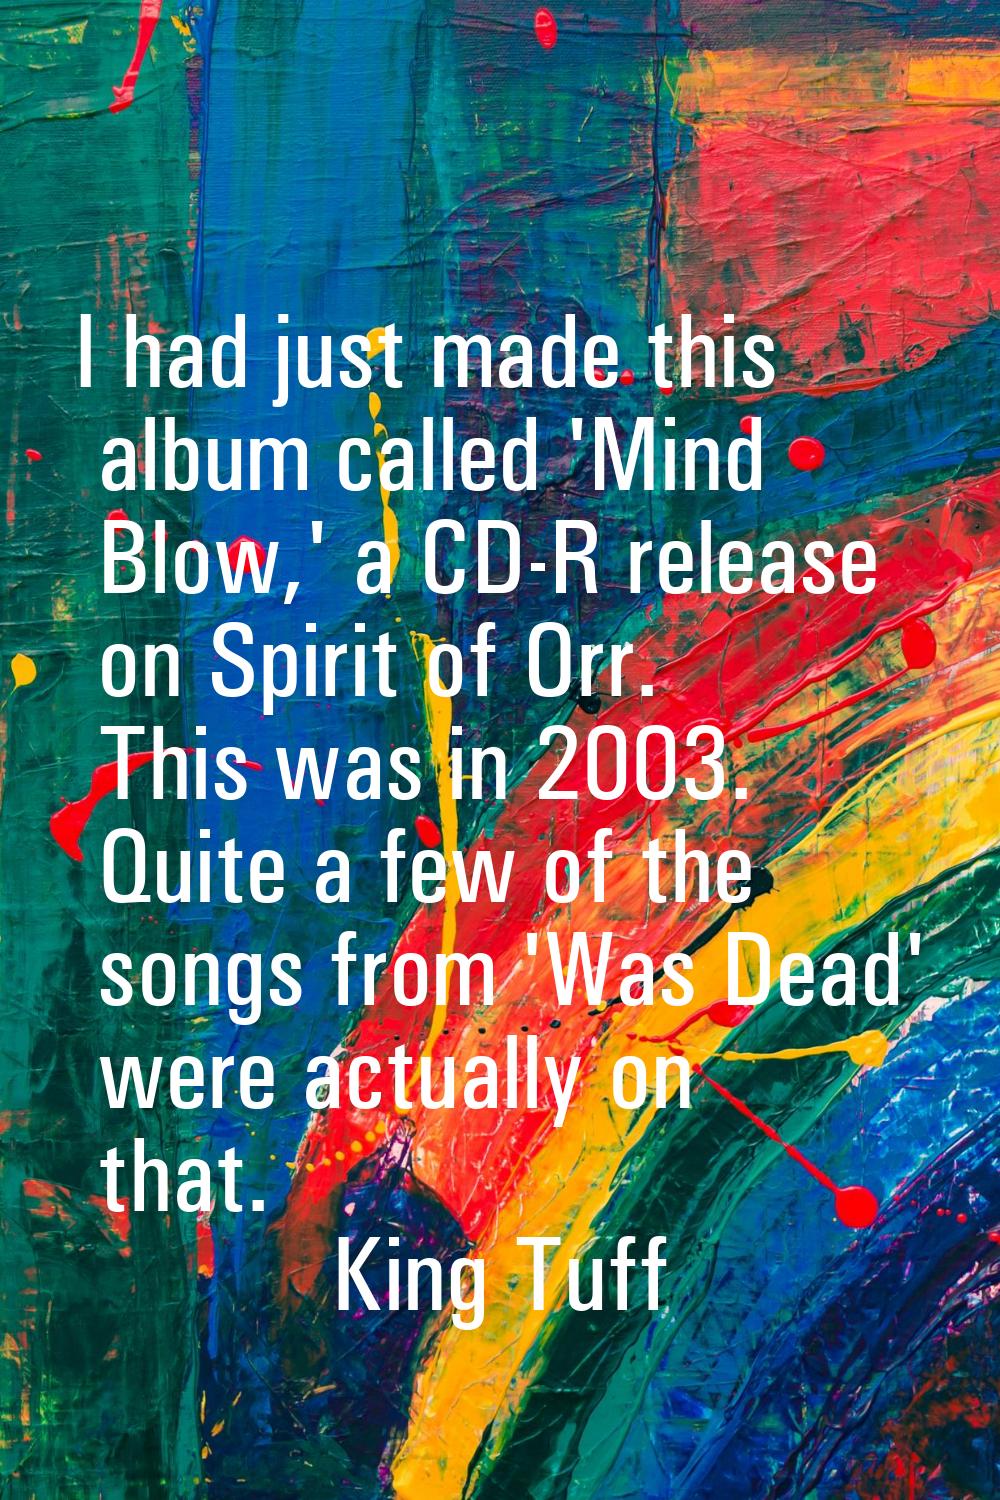 I had just made this album called 'Mind Blow,' a CD-R release on Spirit of Orr. This was in 2003. Q